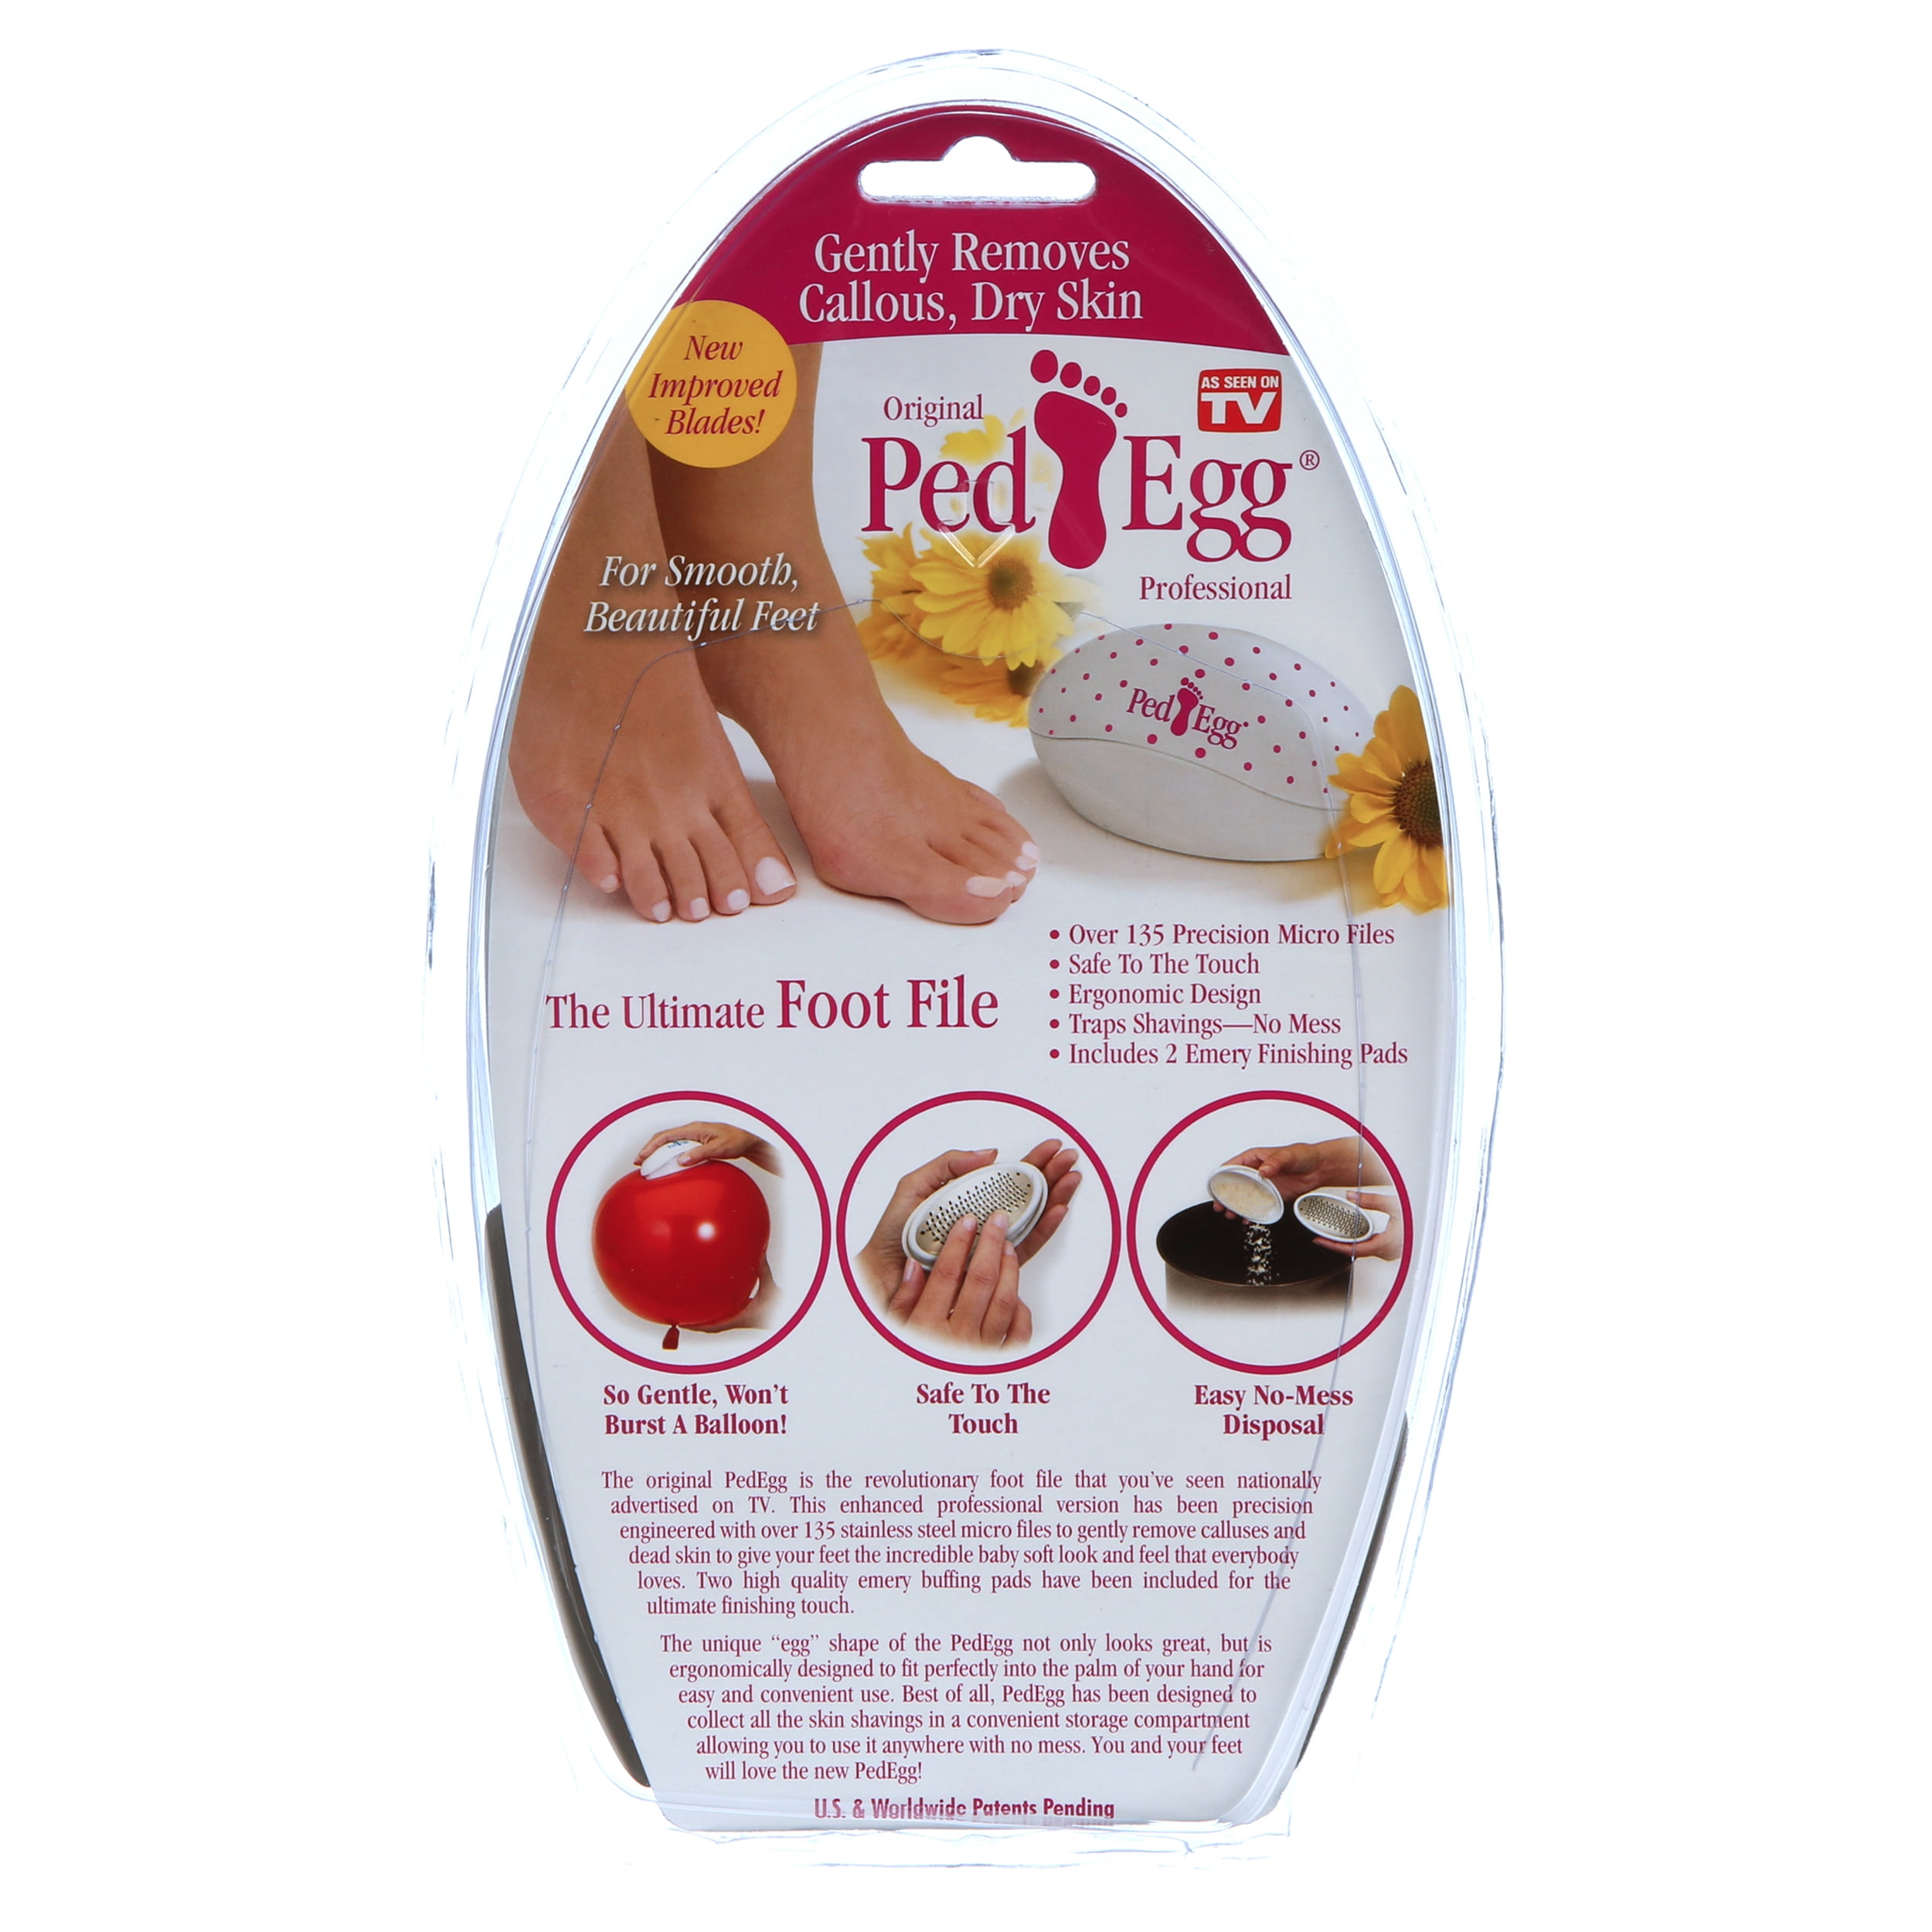 Ped Egg Foot File: The Tried and True Way To Get Callus-Free Feet